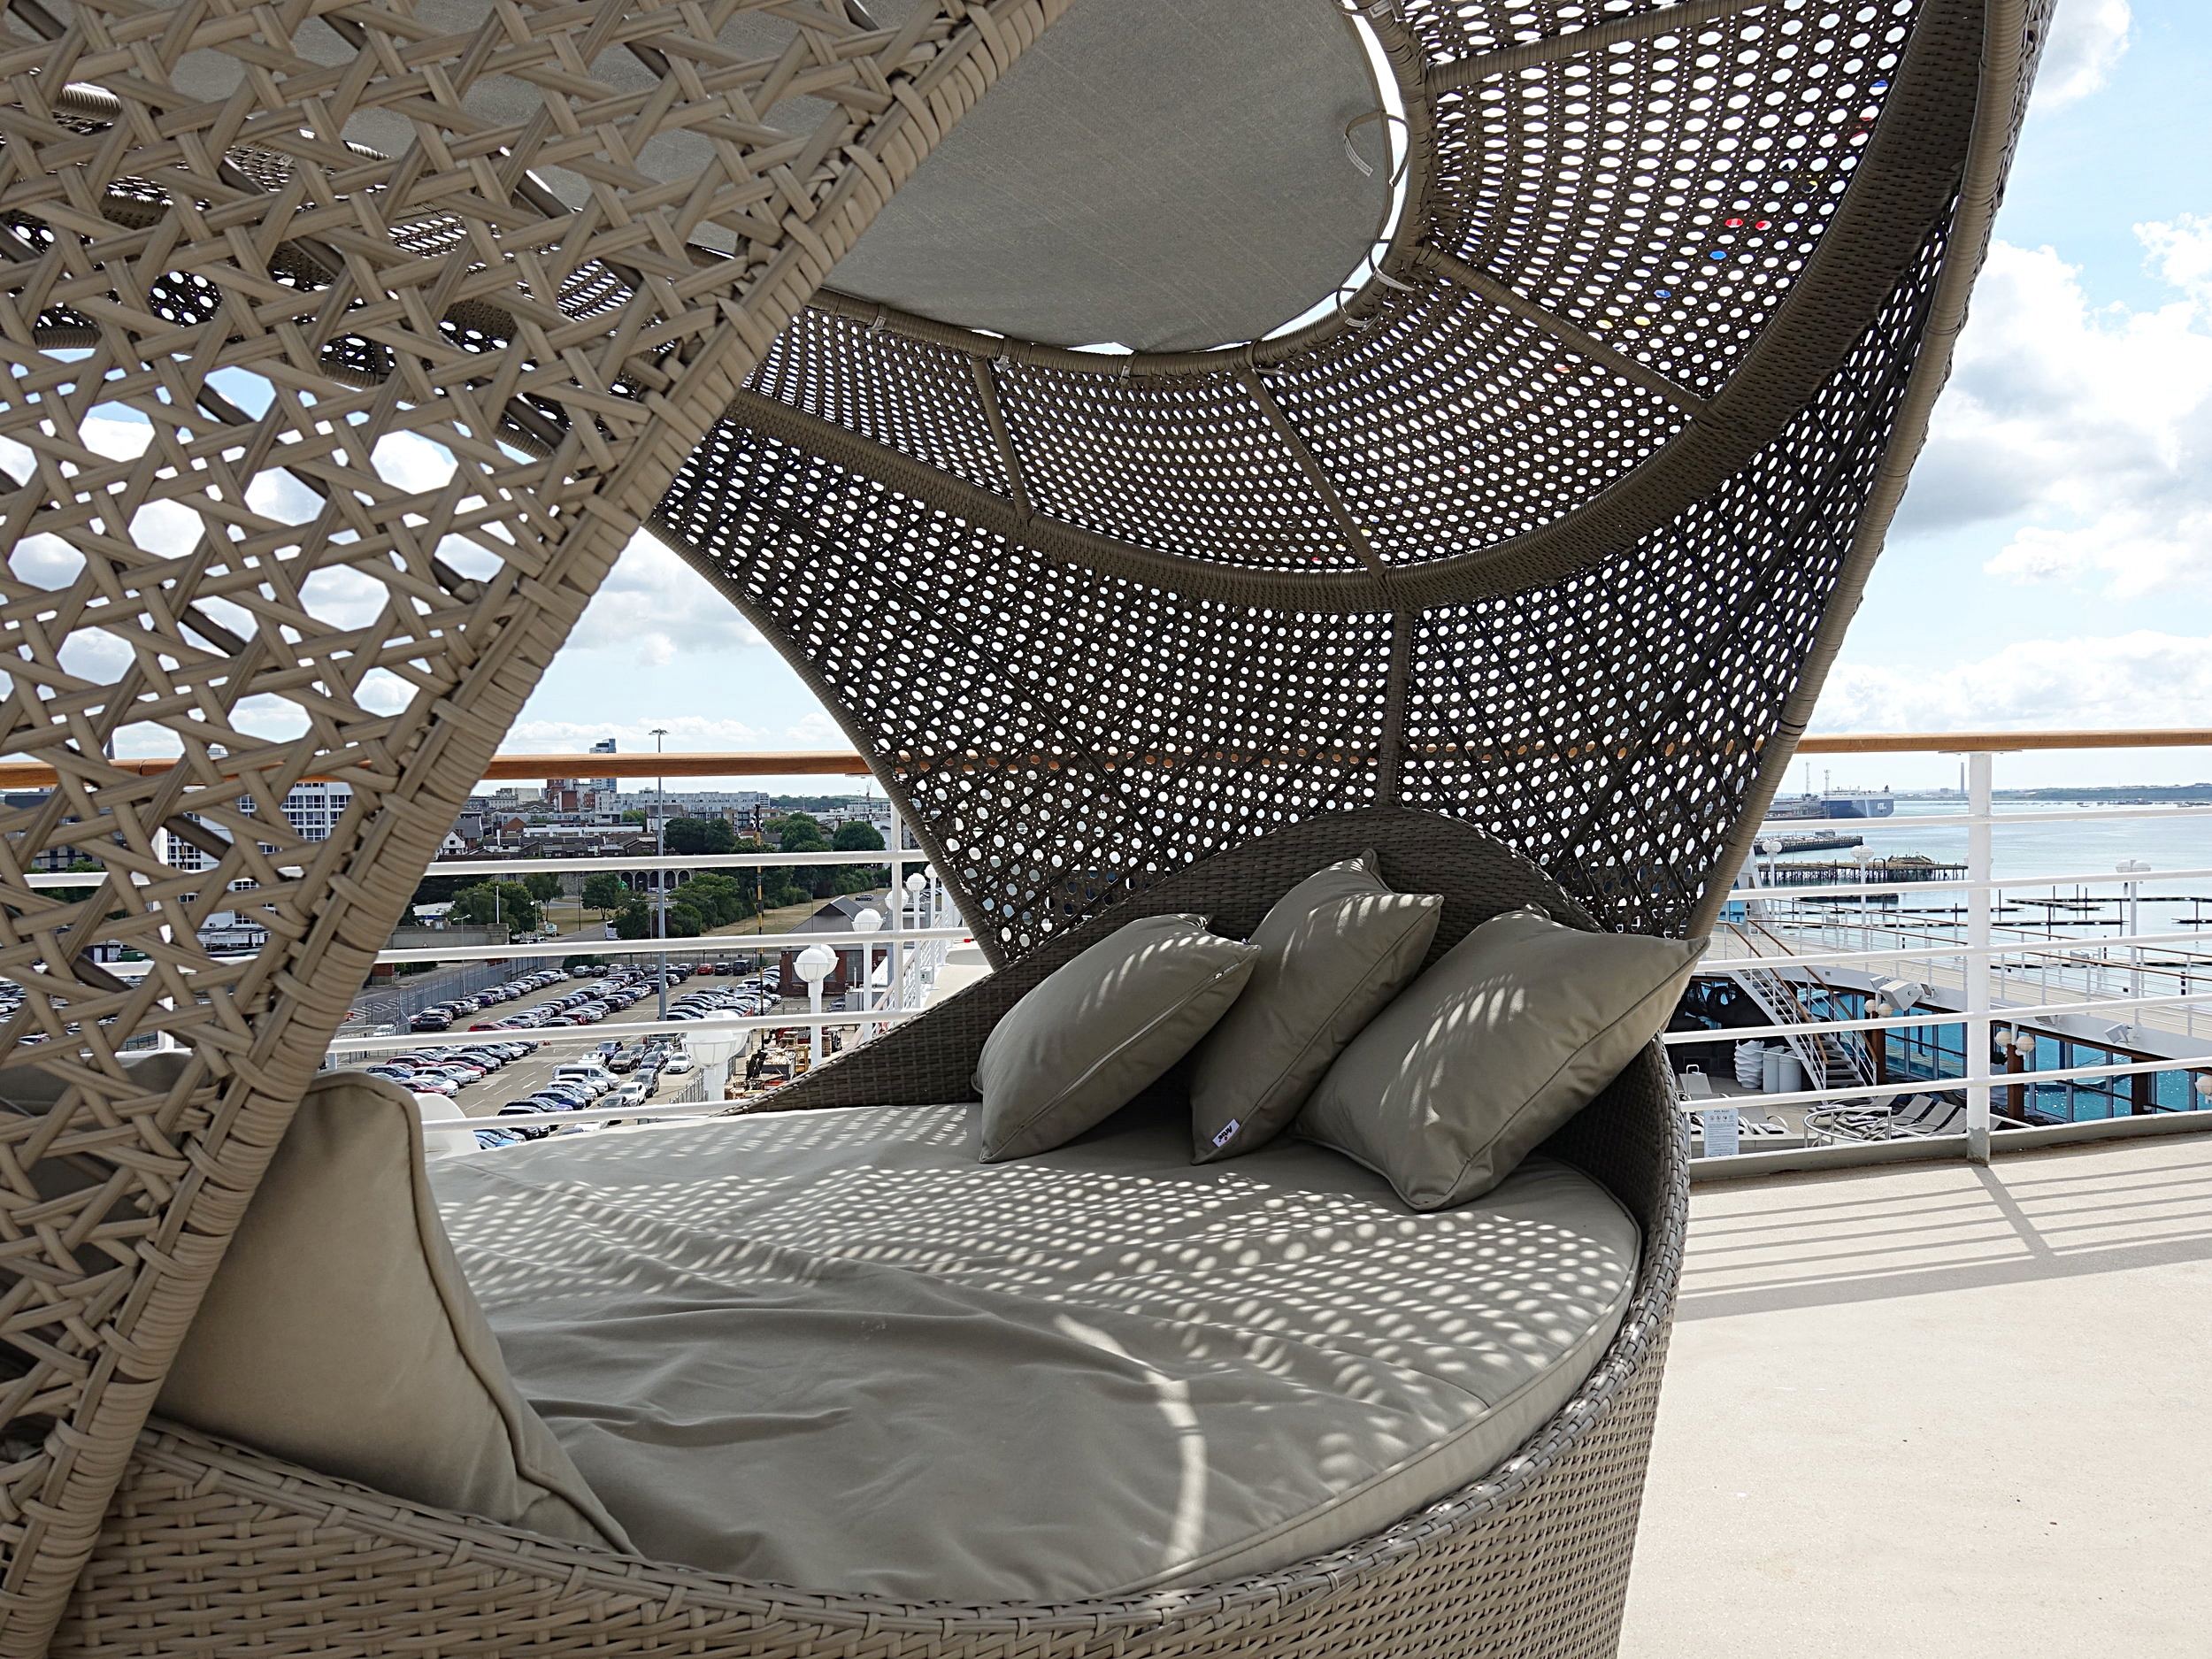 Oval shaped canopied day beds on the upper decks.